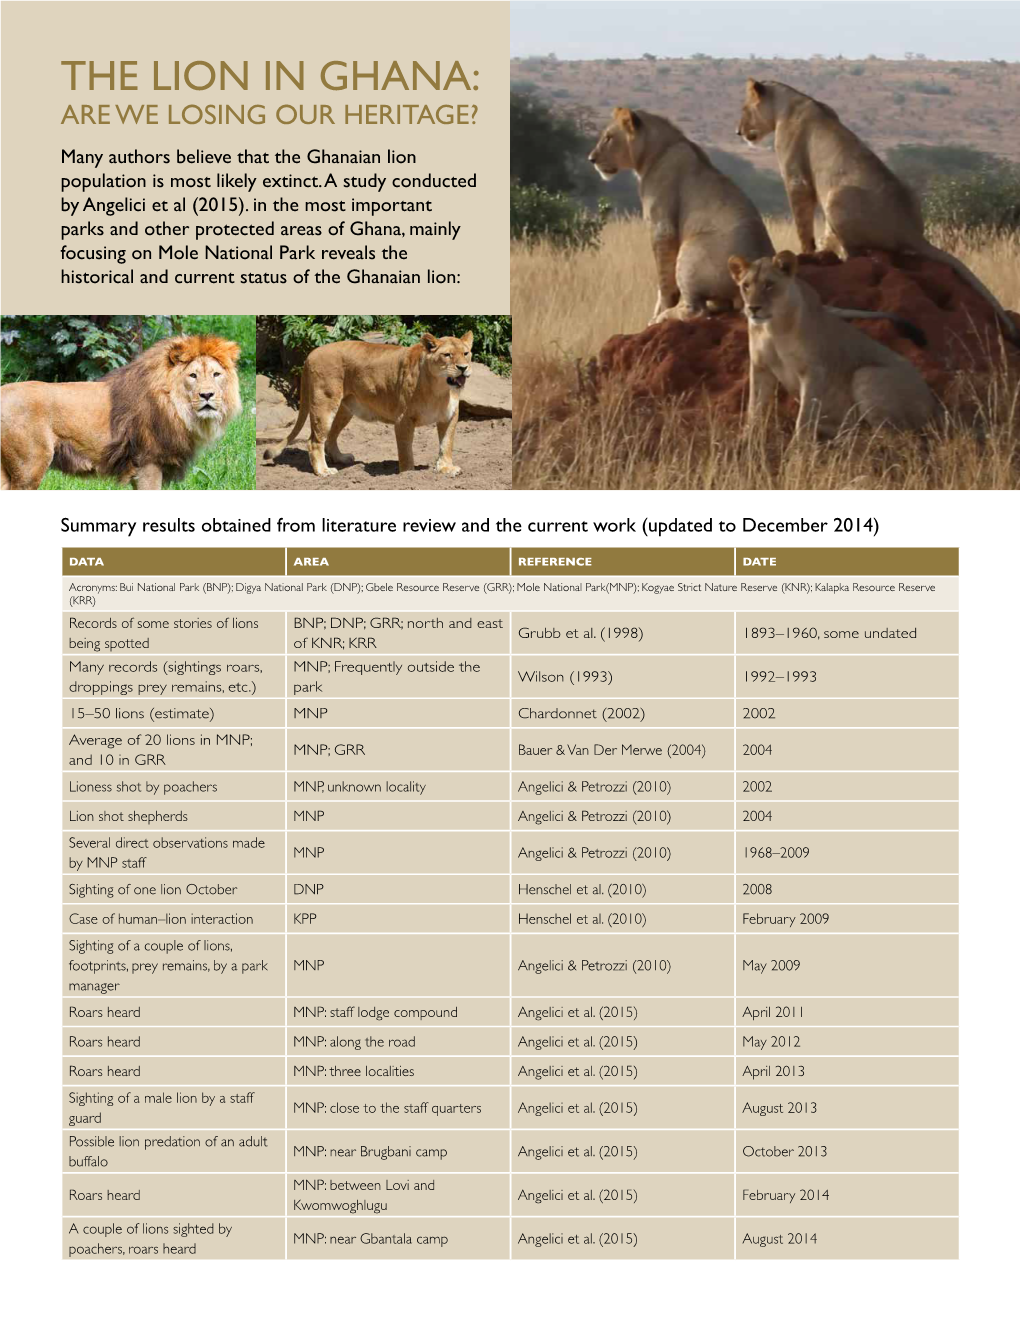 THE LION in GHANA: ARE WE LOSING OUR HERITAGE? Many Authors Believe That the Ghanaian Lion Population Is Most Likely Extinct